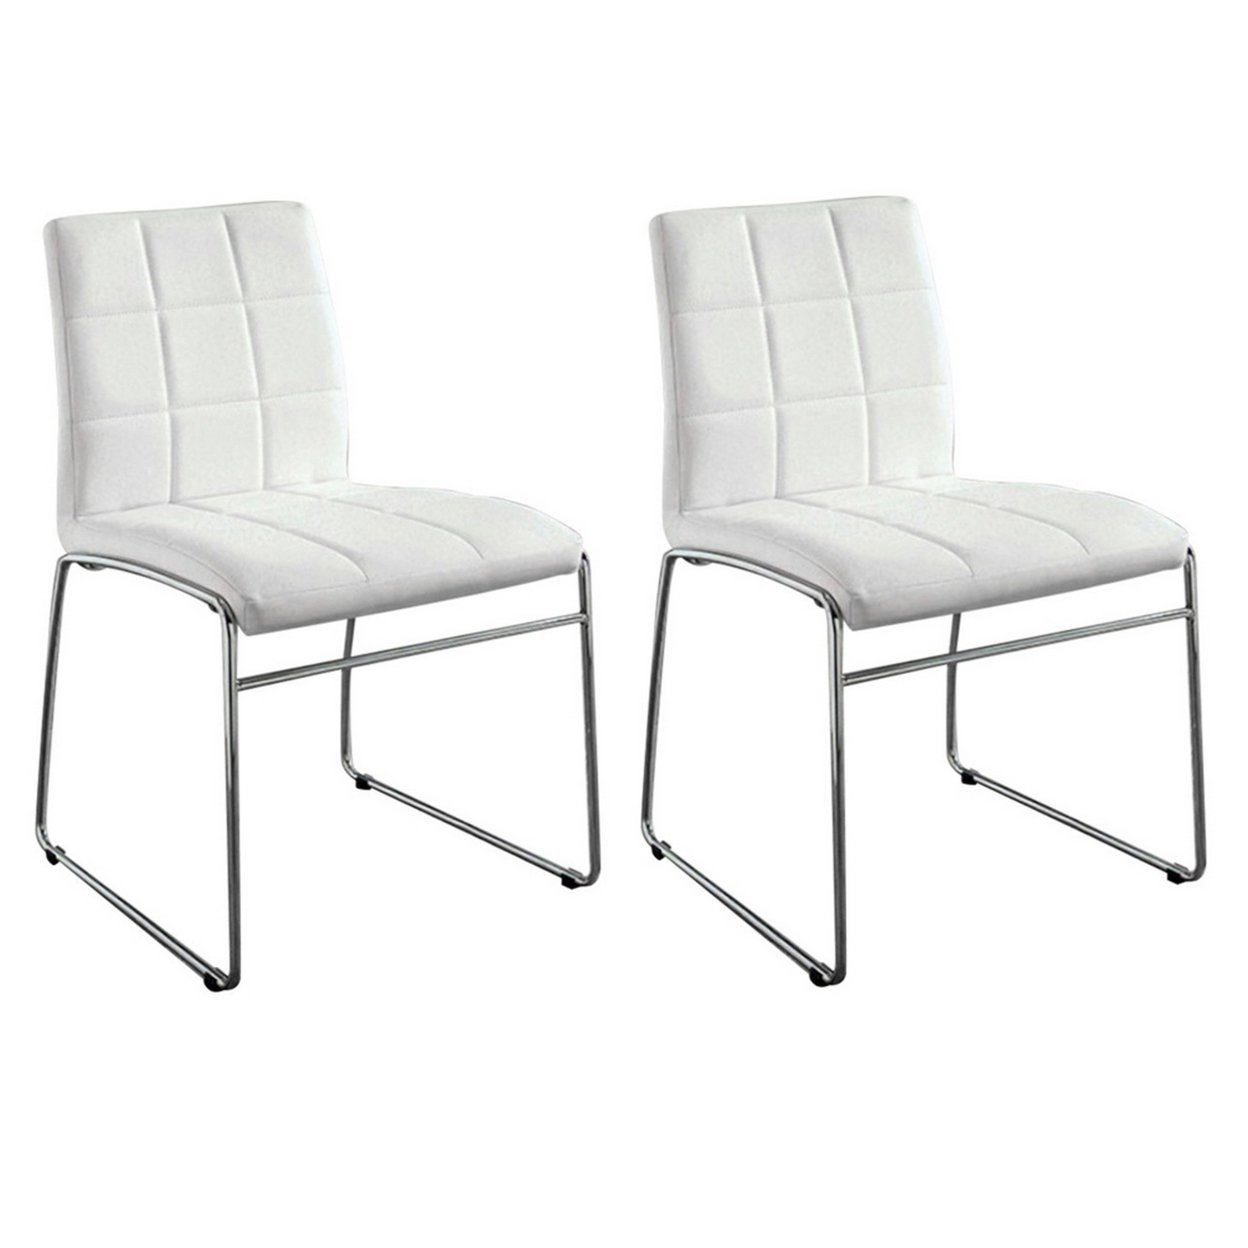 Oahu Contemporary Side Chair With Steel Tube, White Finish, Set Of 2- Saltoro Sherpi